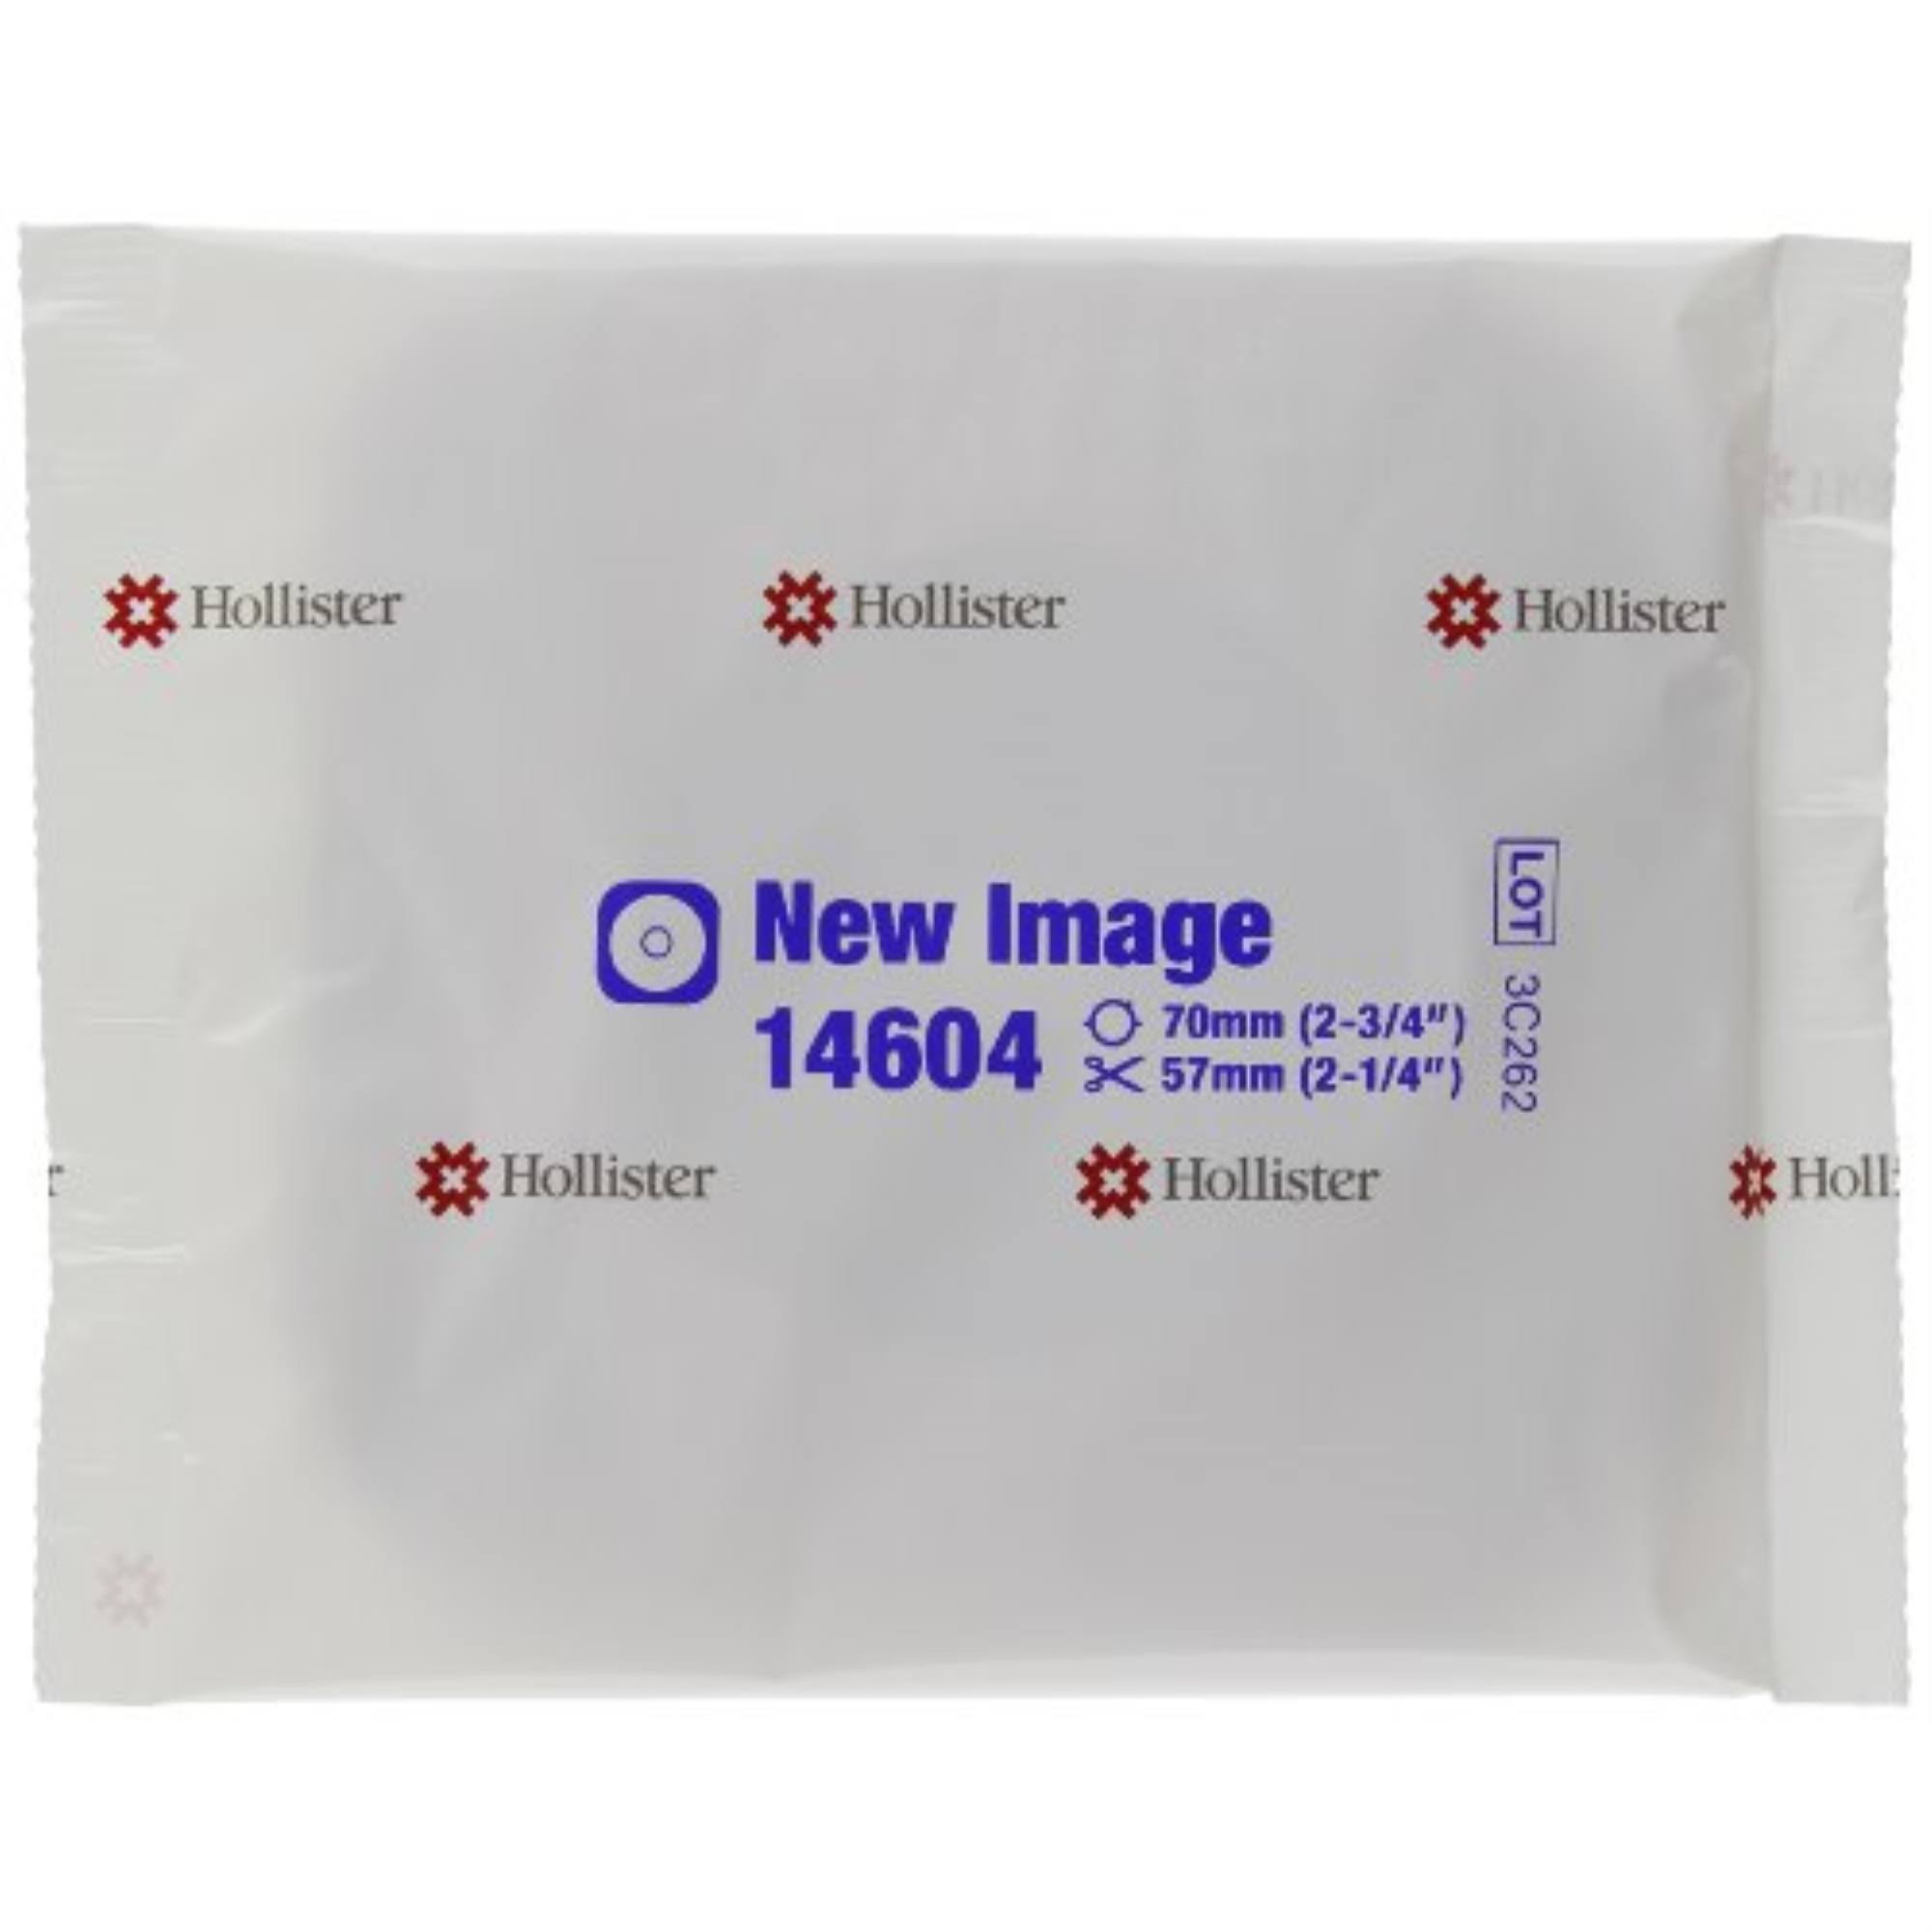 Hollister Cut-to-Fit Flextend Colostomy Skin Barrier - 5 per Box